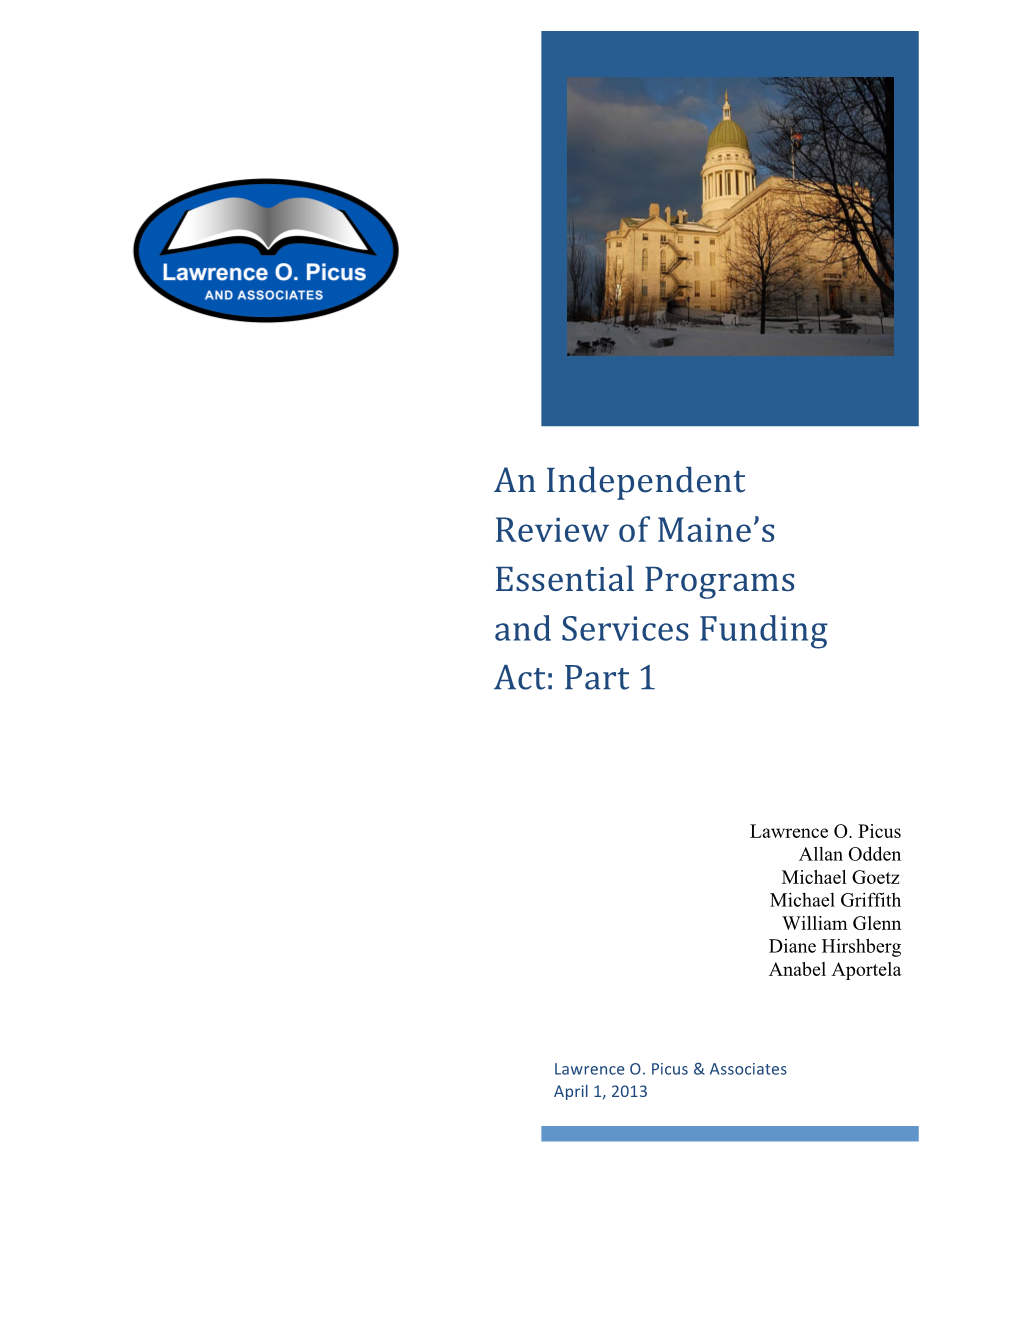 An Independent Review of Maine's Essential Programs and Services